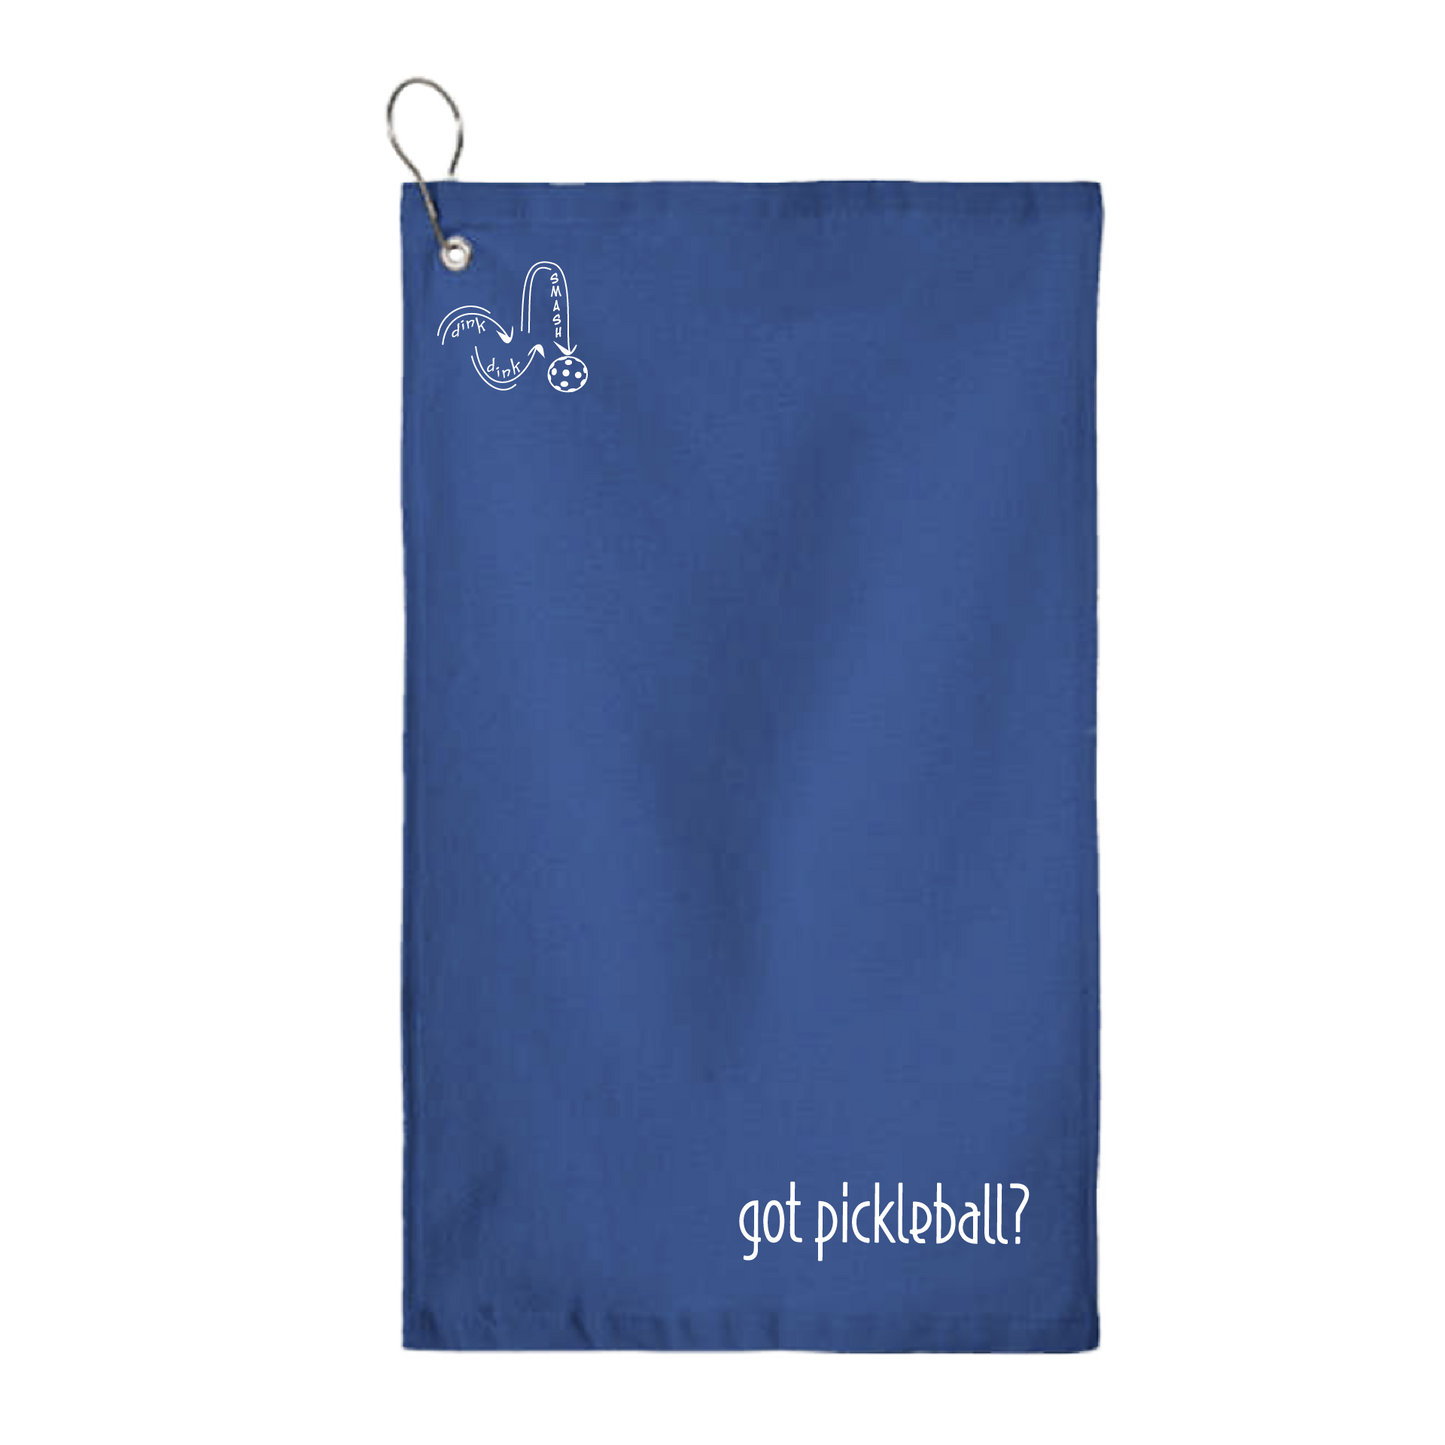 This Got Pickleball towel is crafted with cotton terry velour for optimal performance. It features grommets, hooks, and hemmed edges for added durability. It's perfect for completing your pickleball gear, and an ideal gift for friends and tournaments. The towel is designed to be both absorbent and lightweight, so you can remain dry and comfortable while you play.